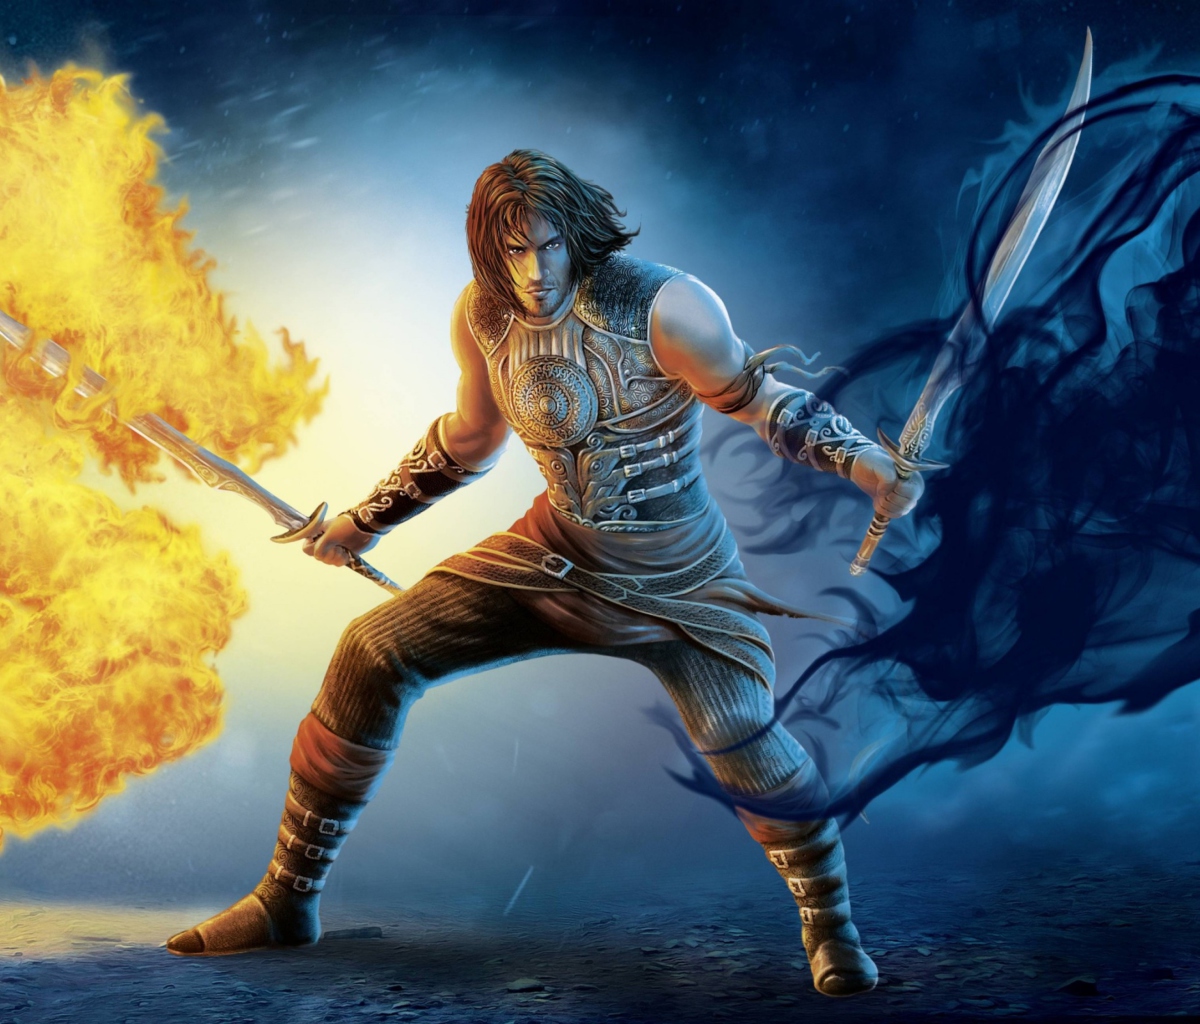 Prince Of Persia 2 Shadow And Flame wallpaper 1200x1024